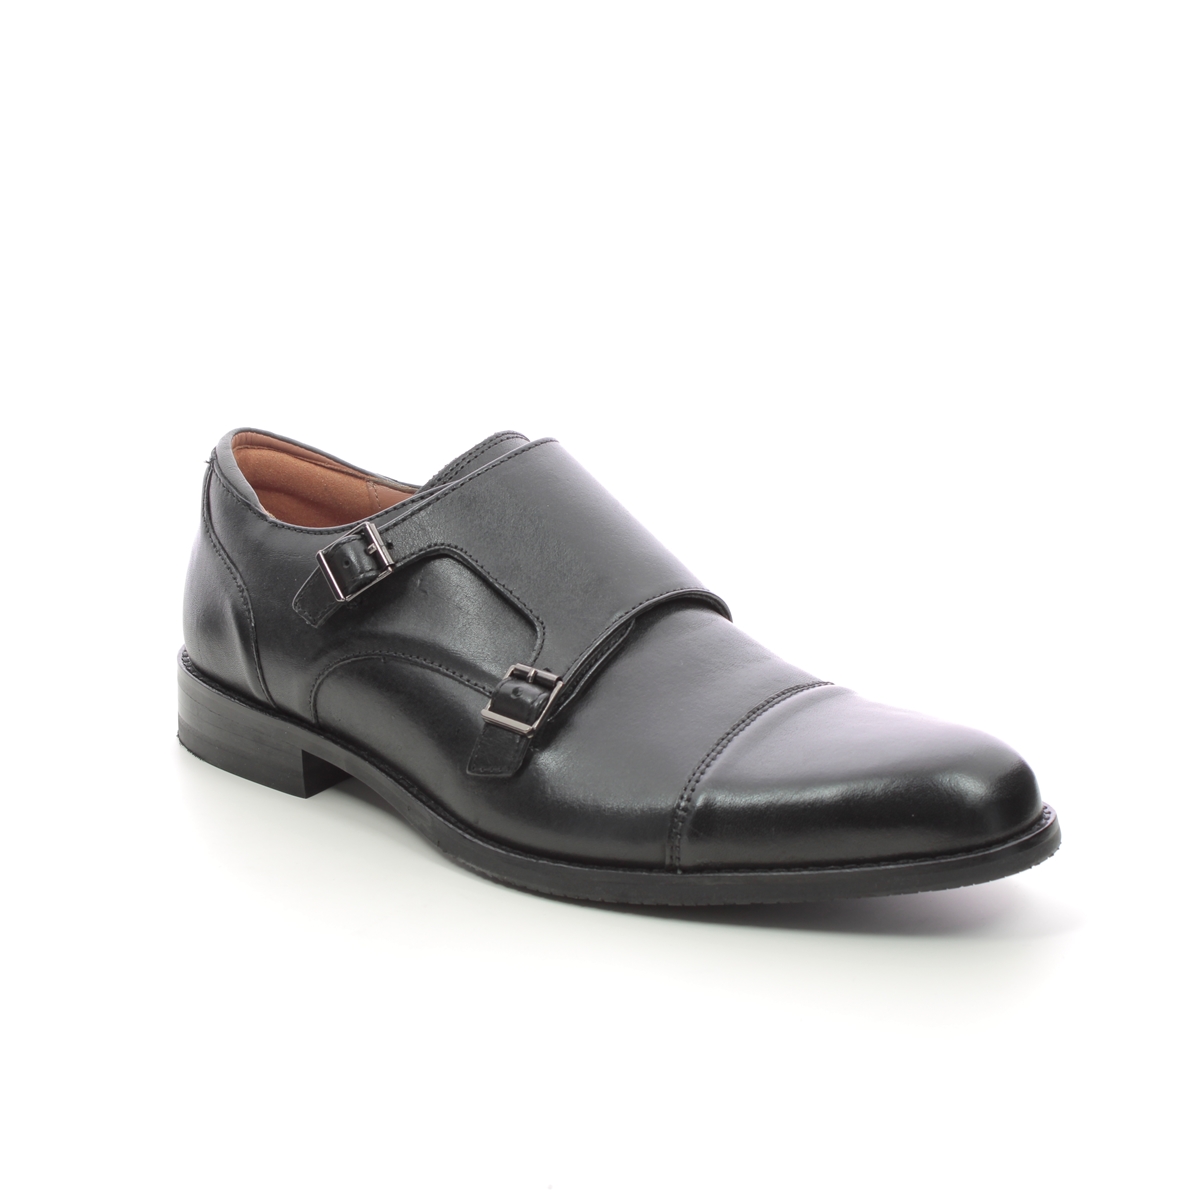 Clarks Craftarlo Monk Black Leather Mens Formal Shoes 724517G In Size 8 In Plain Black Leather G Width Fitting